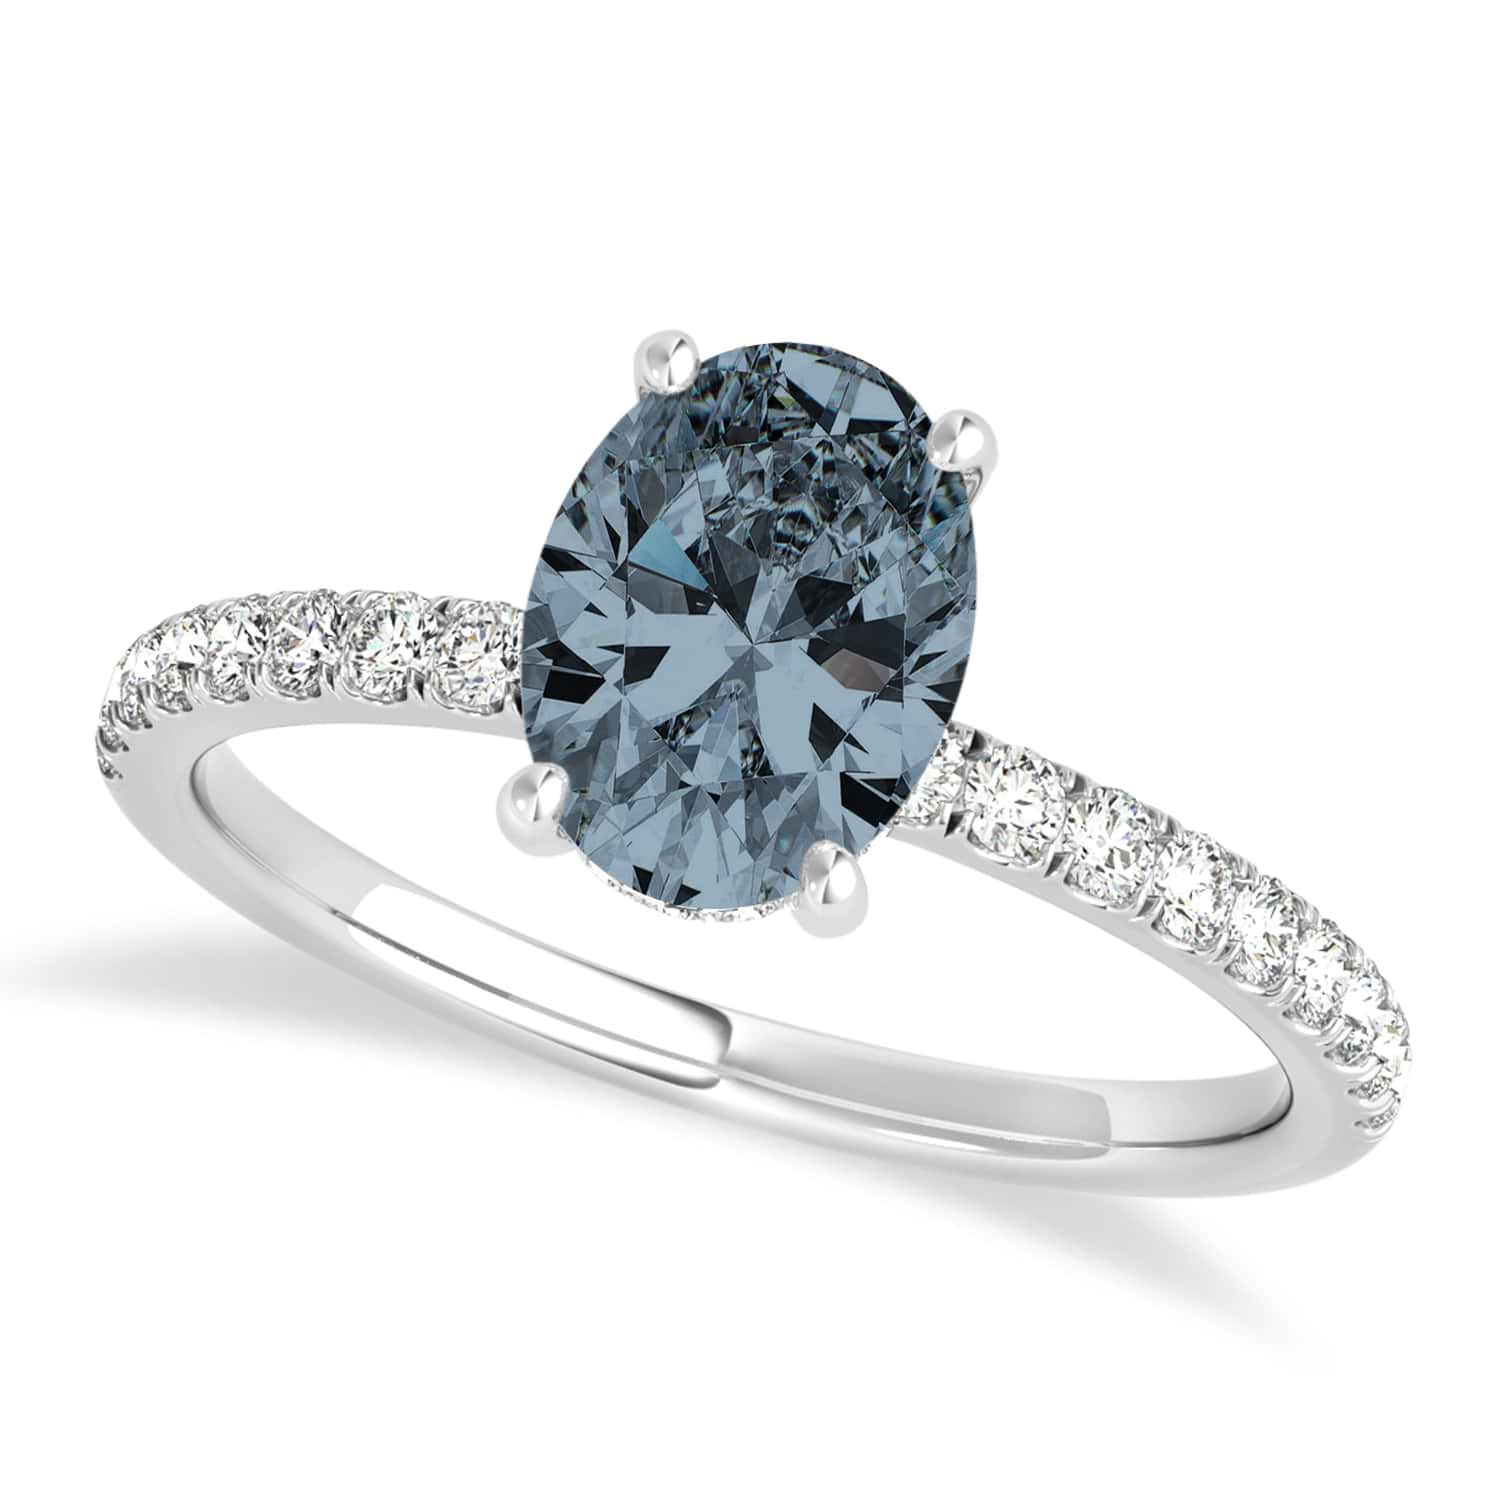 Oval Gray Spinel & Diamond Single Row Hidden Halo Engagement Ring 18k White Gold (0.68ct)